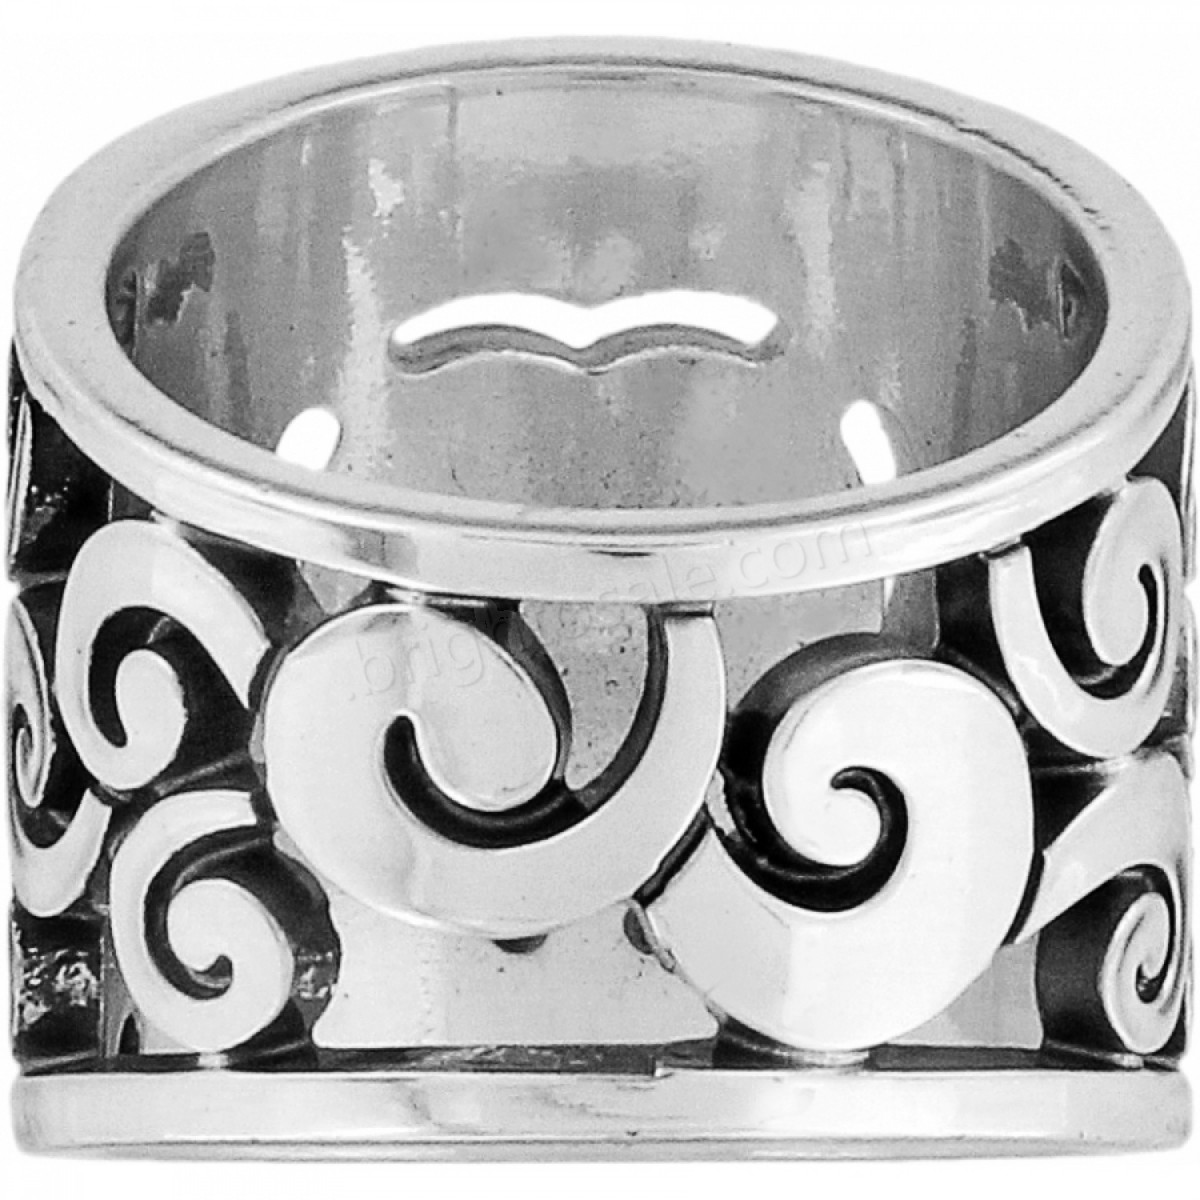 Brighton Collectibles & Online Discount Ecstatic Heart Ring - -2